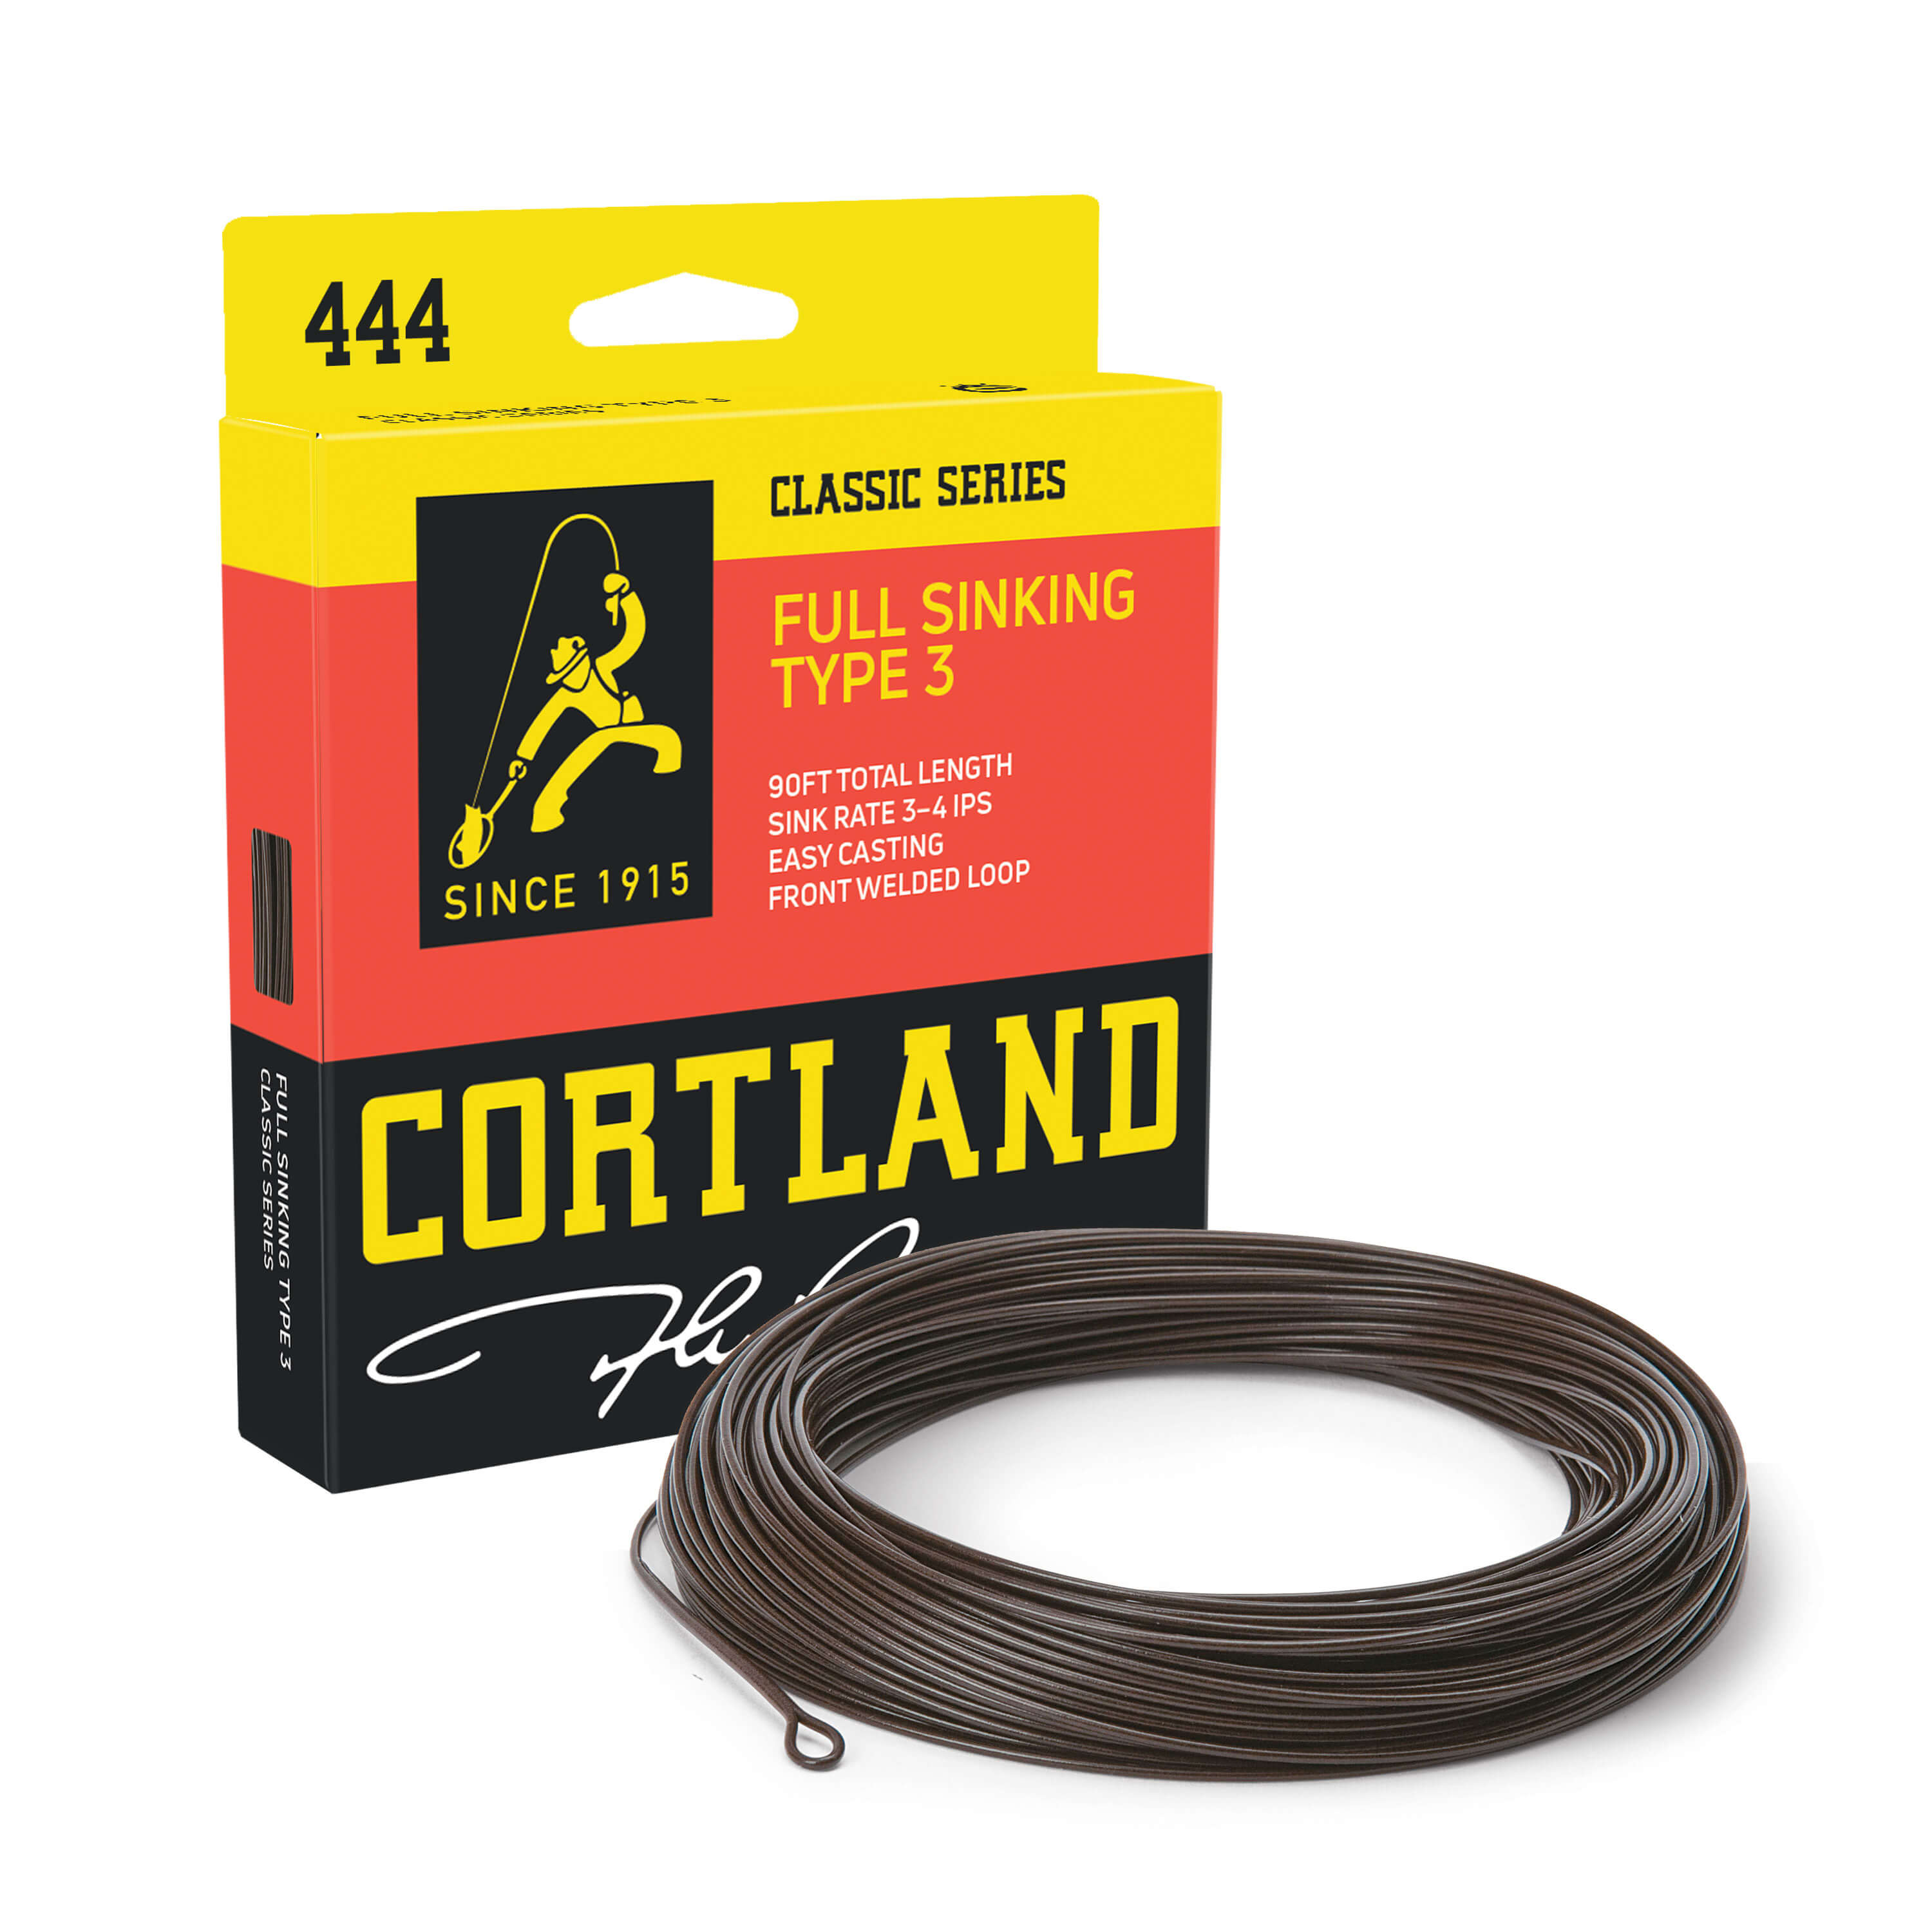 Cortland Full Sinking Type 3 444 Fly Line - Brown - WF6S